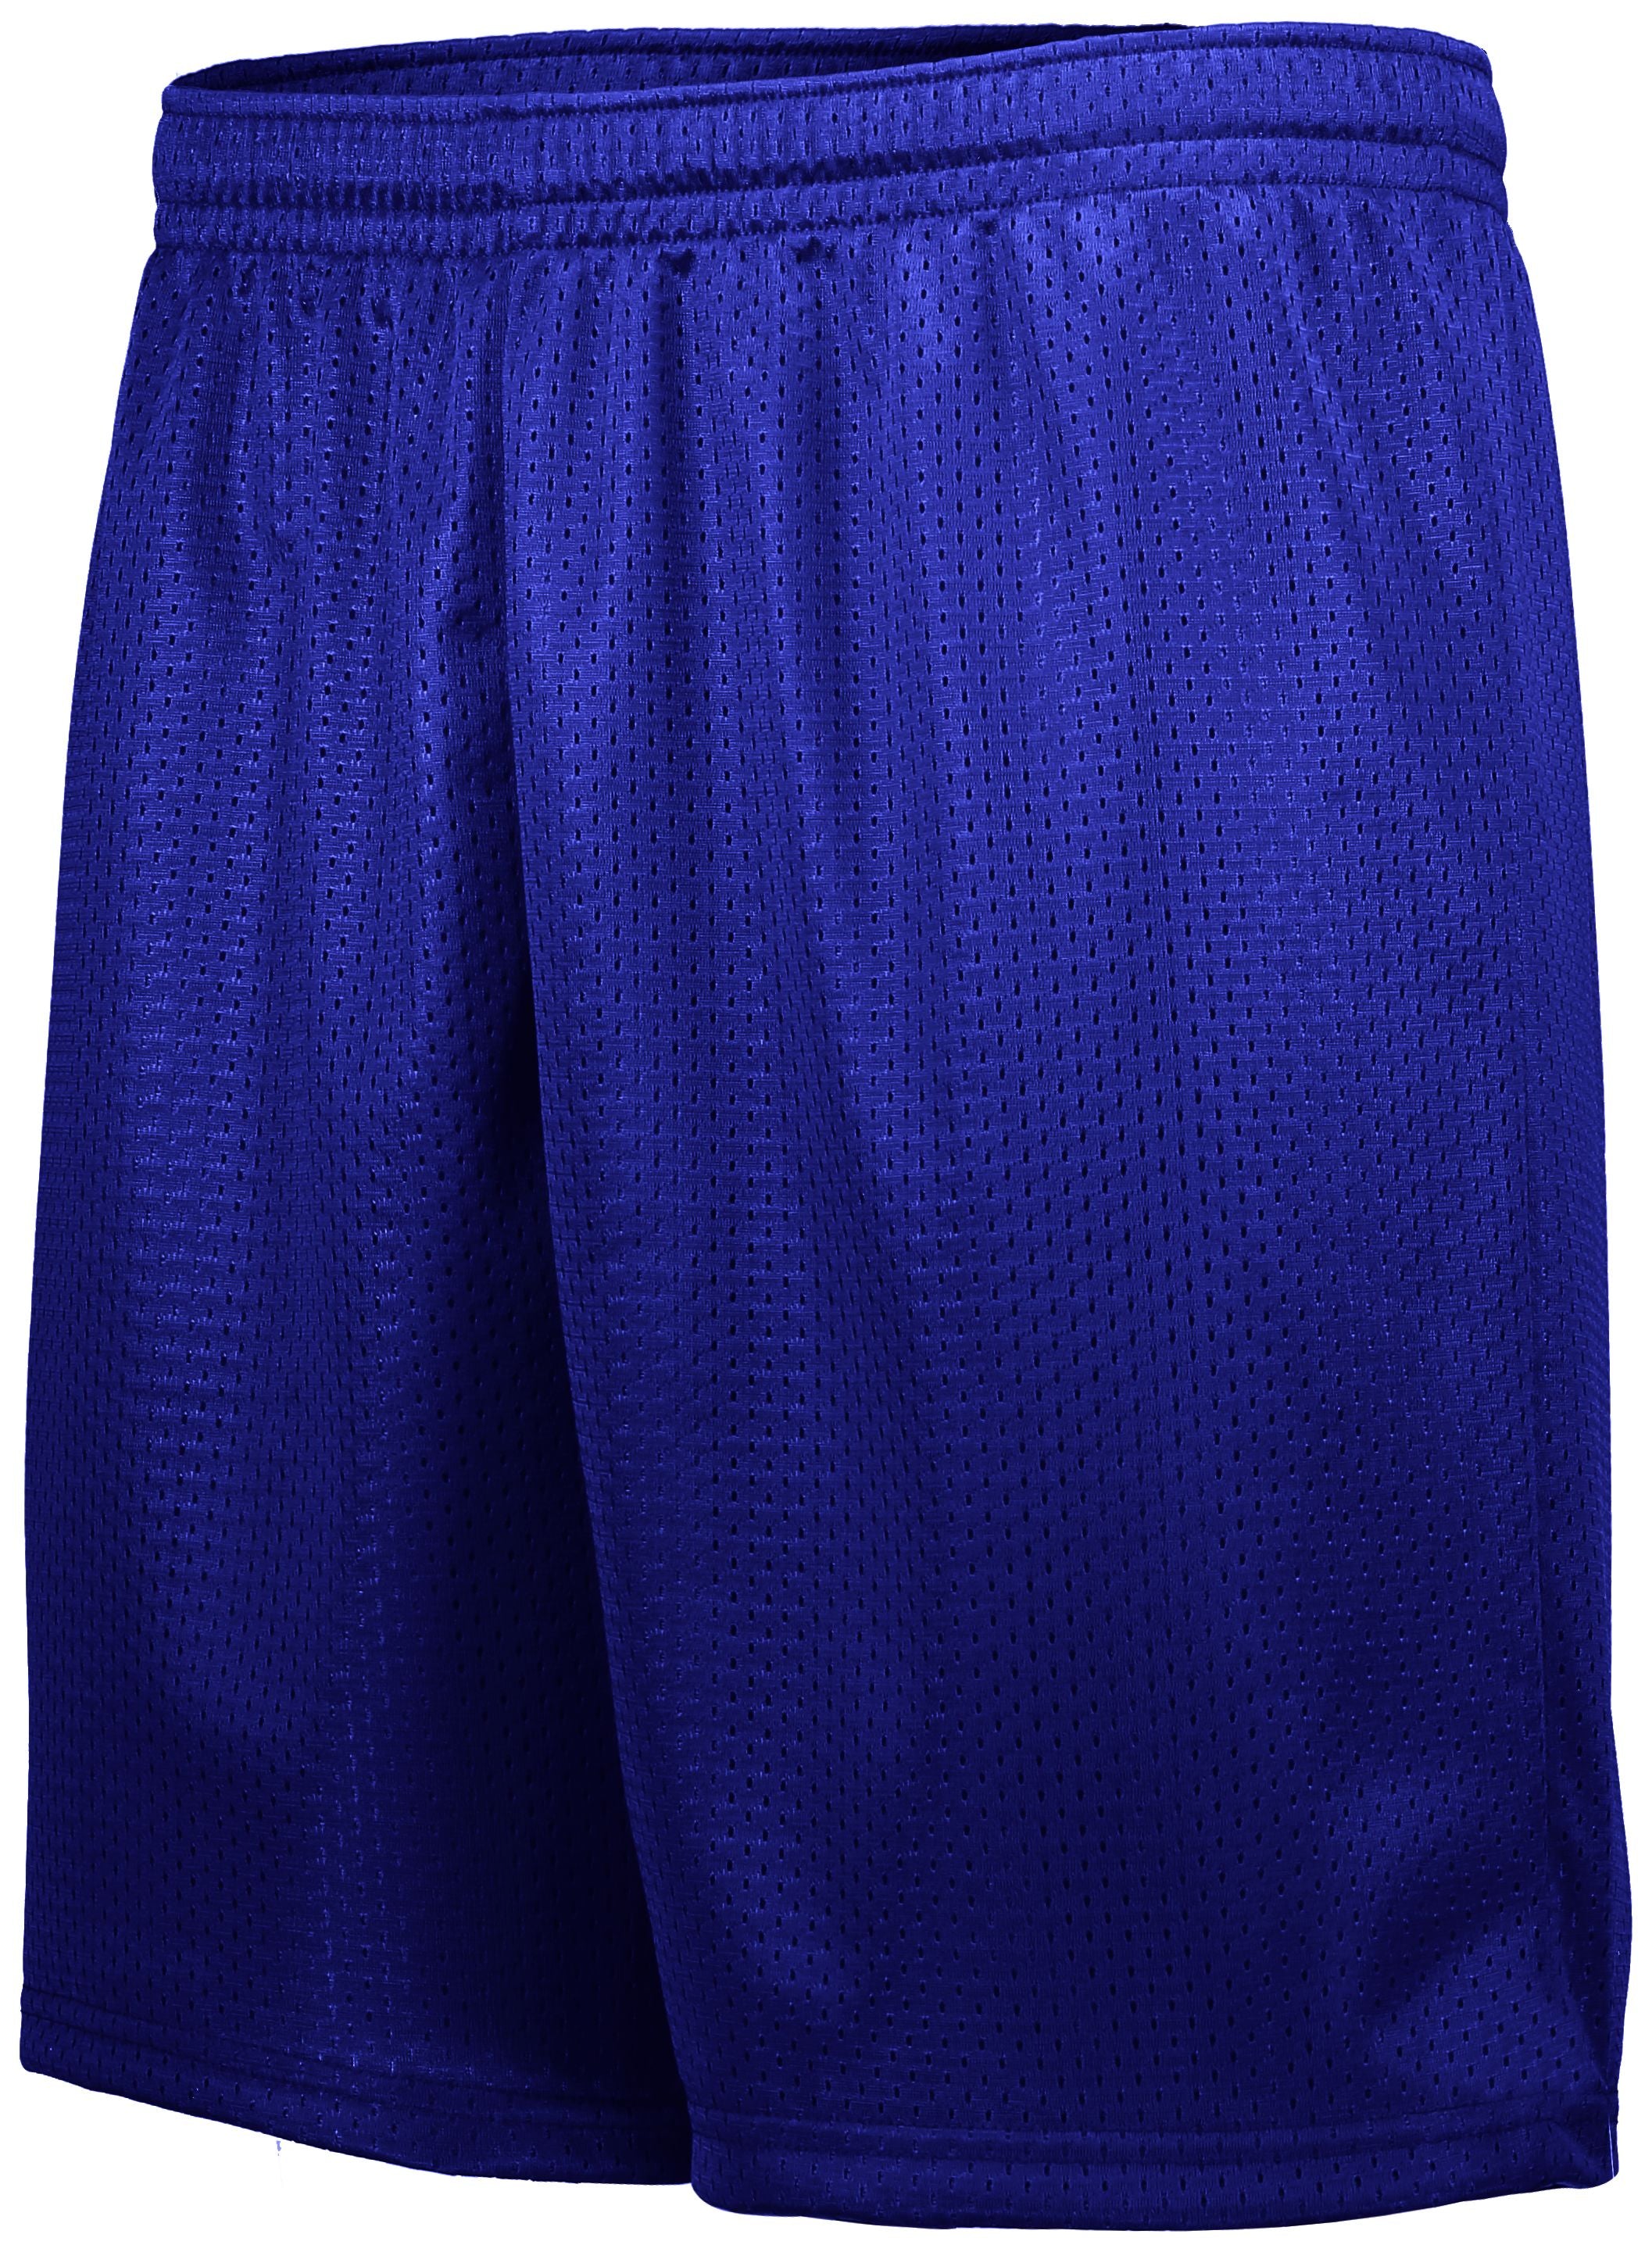 Augusta Sportswear Youth Tricot Mesh Shorts in Purple (Hlw)  -Part of the Youth, Youth-Shorts, Augusta-Products product lines at KanaleyCreations.com